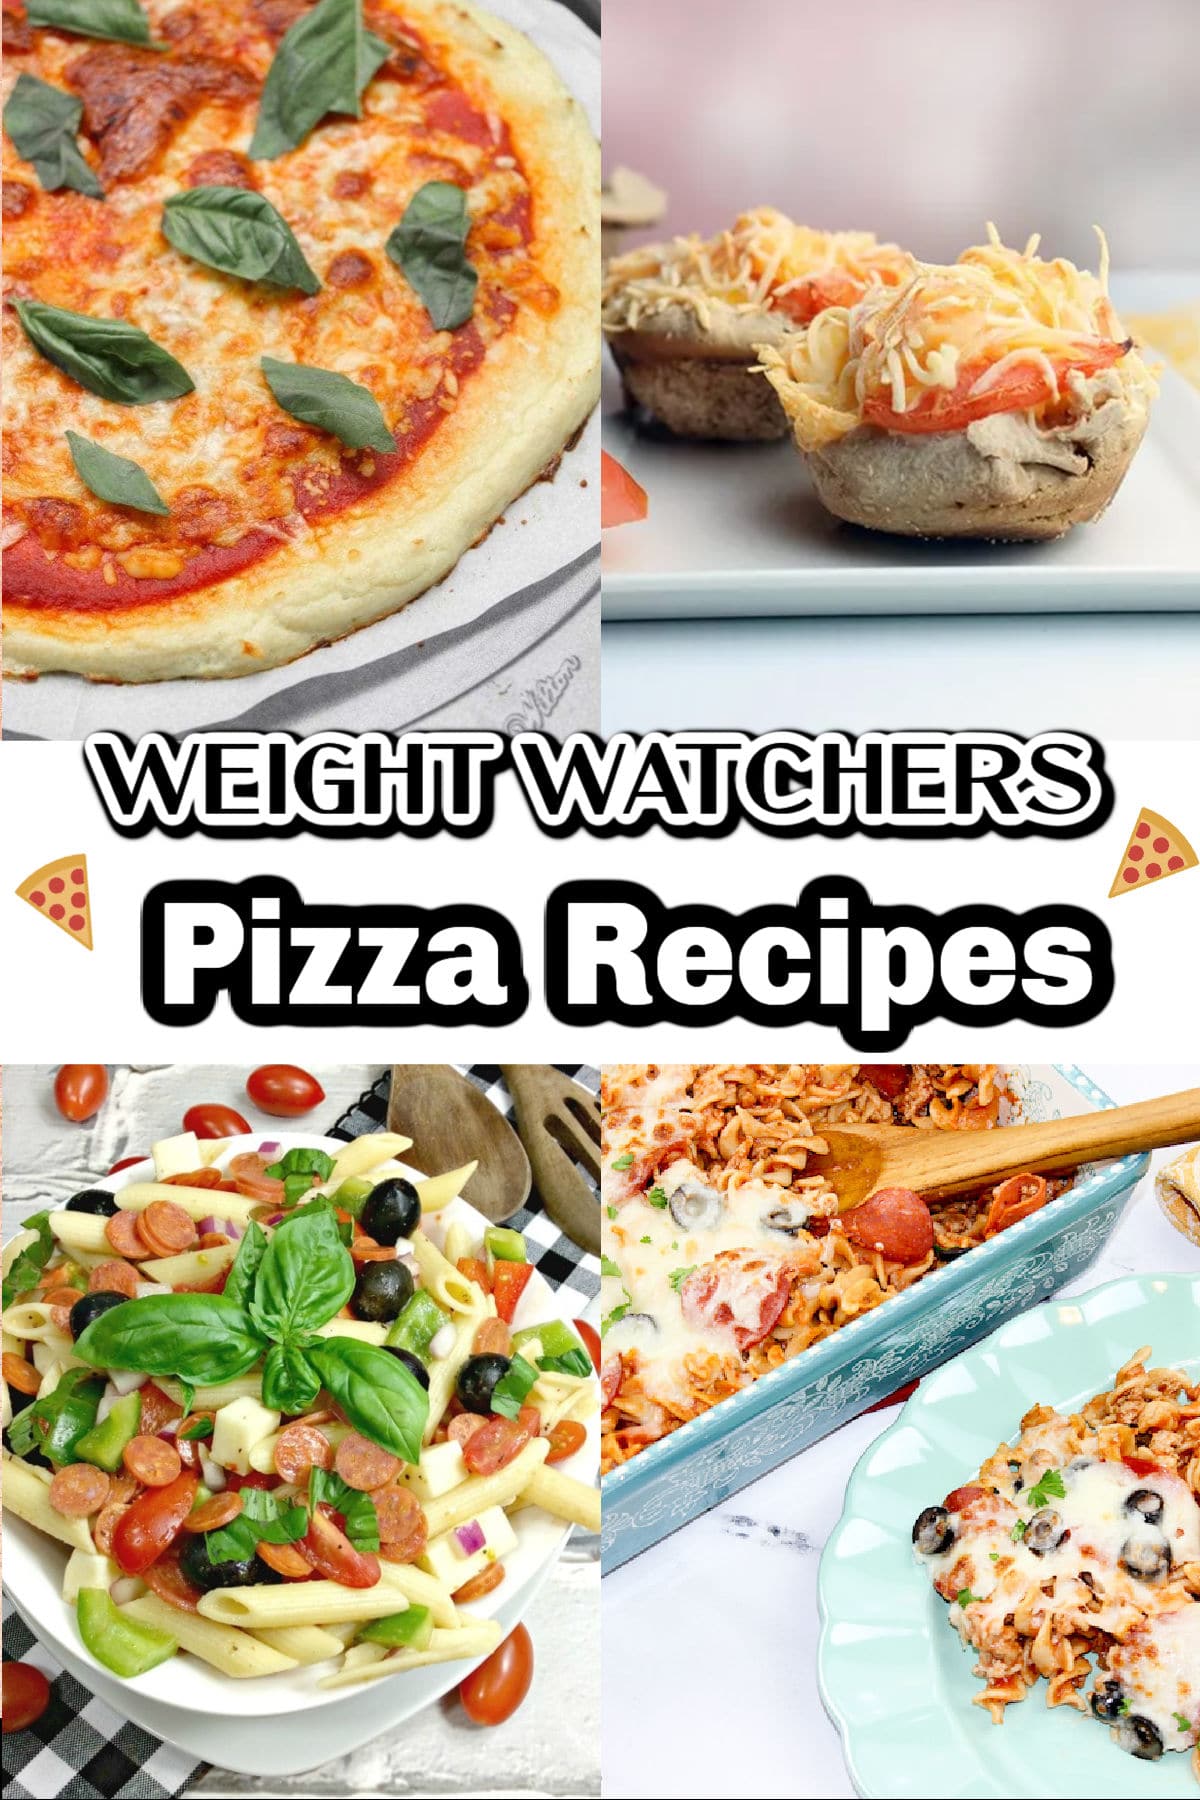 Weight Watchers Pizza Recipes - Food Fun & Faraway Places